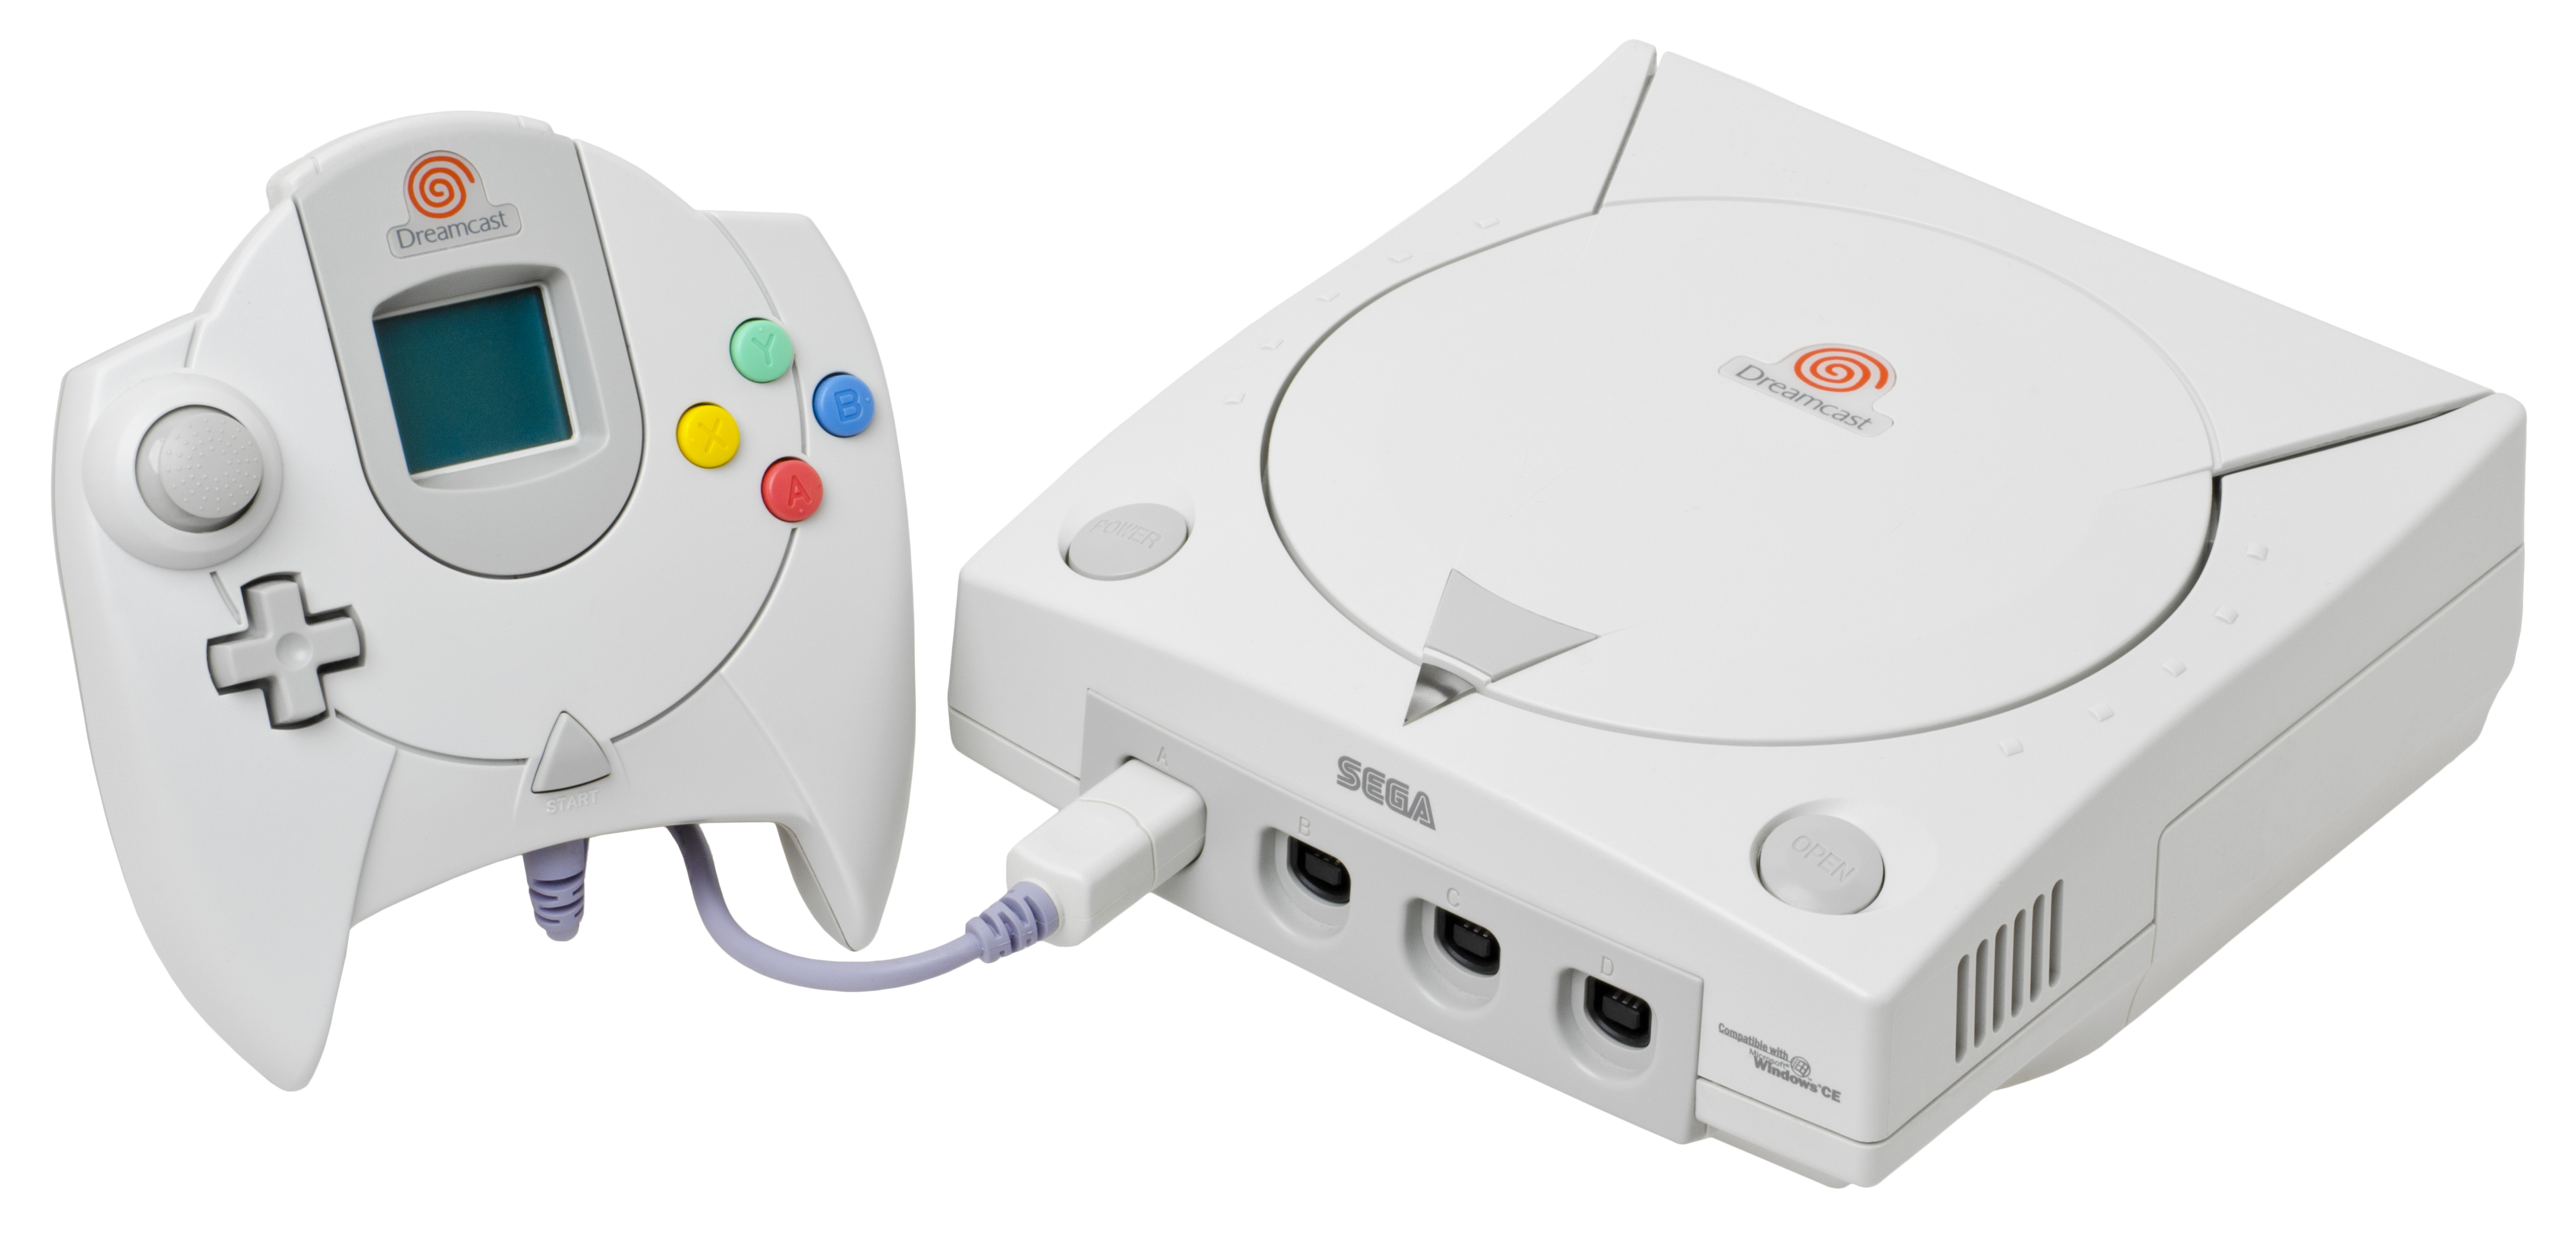 𝐃𝐫𝐞𝐚𝐦𝐜𝐚𝐬𝐭 𝐀𝐞𝐬𝐭𝐡𝐞𝐭𝐢𝐜 on X: Dreamcast Launch